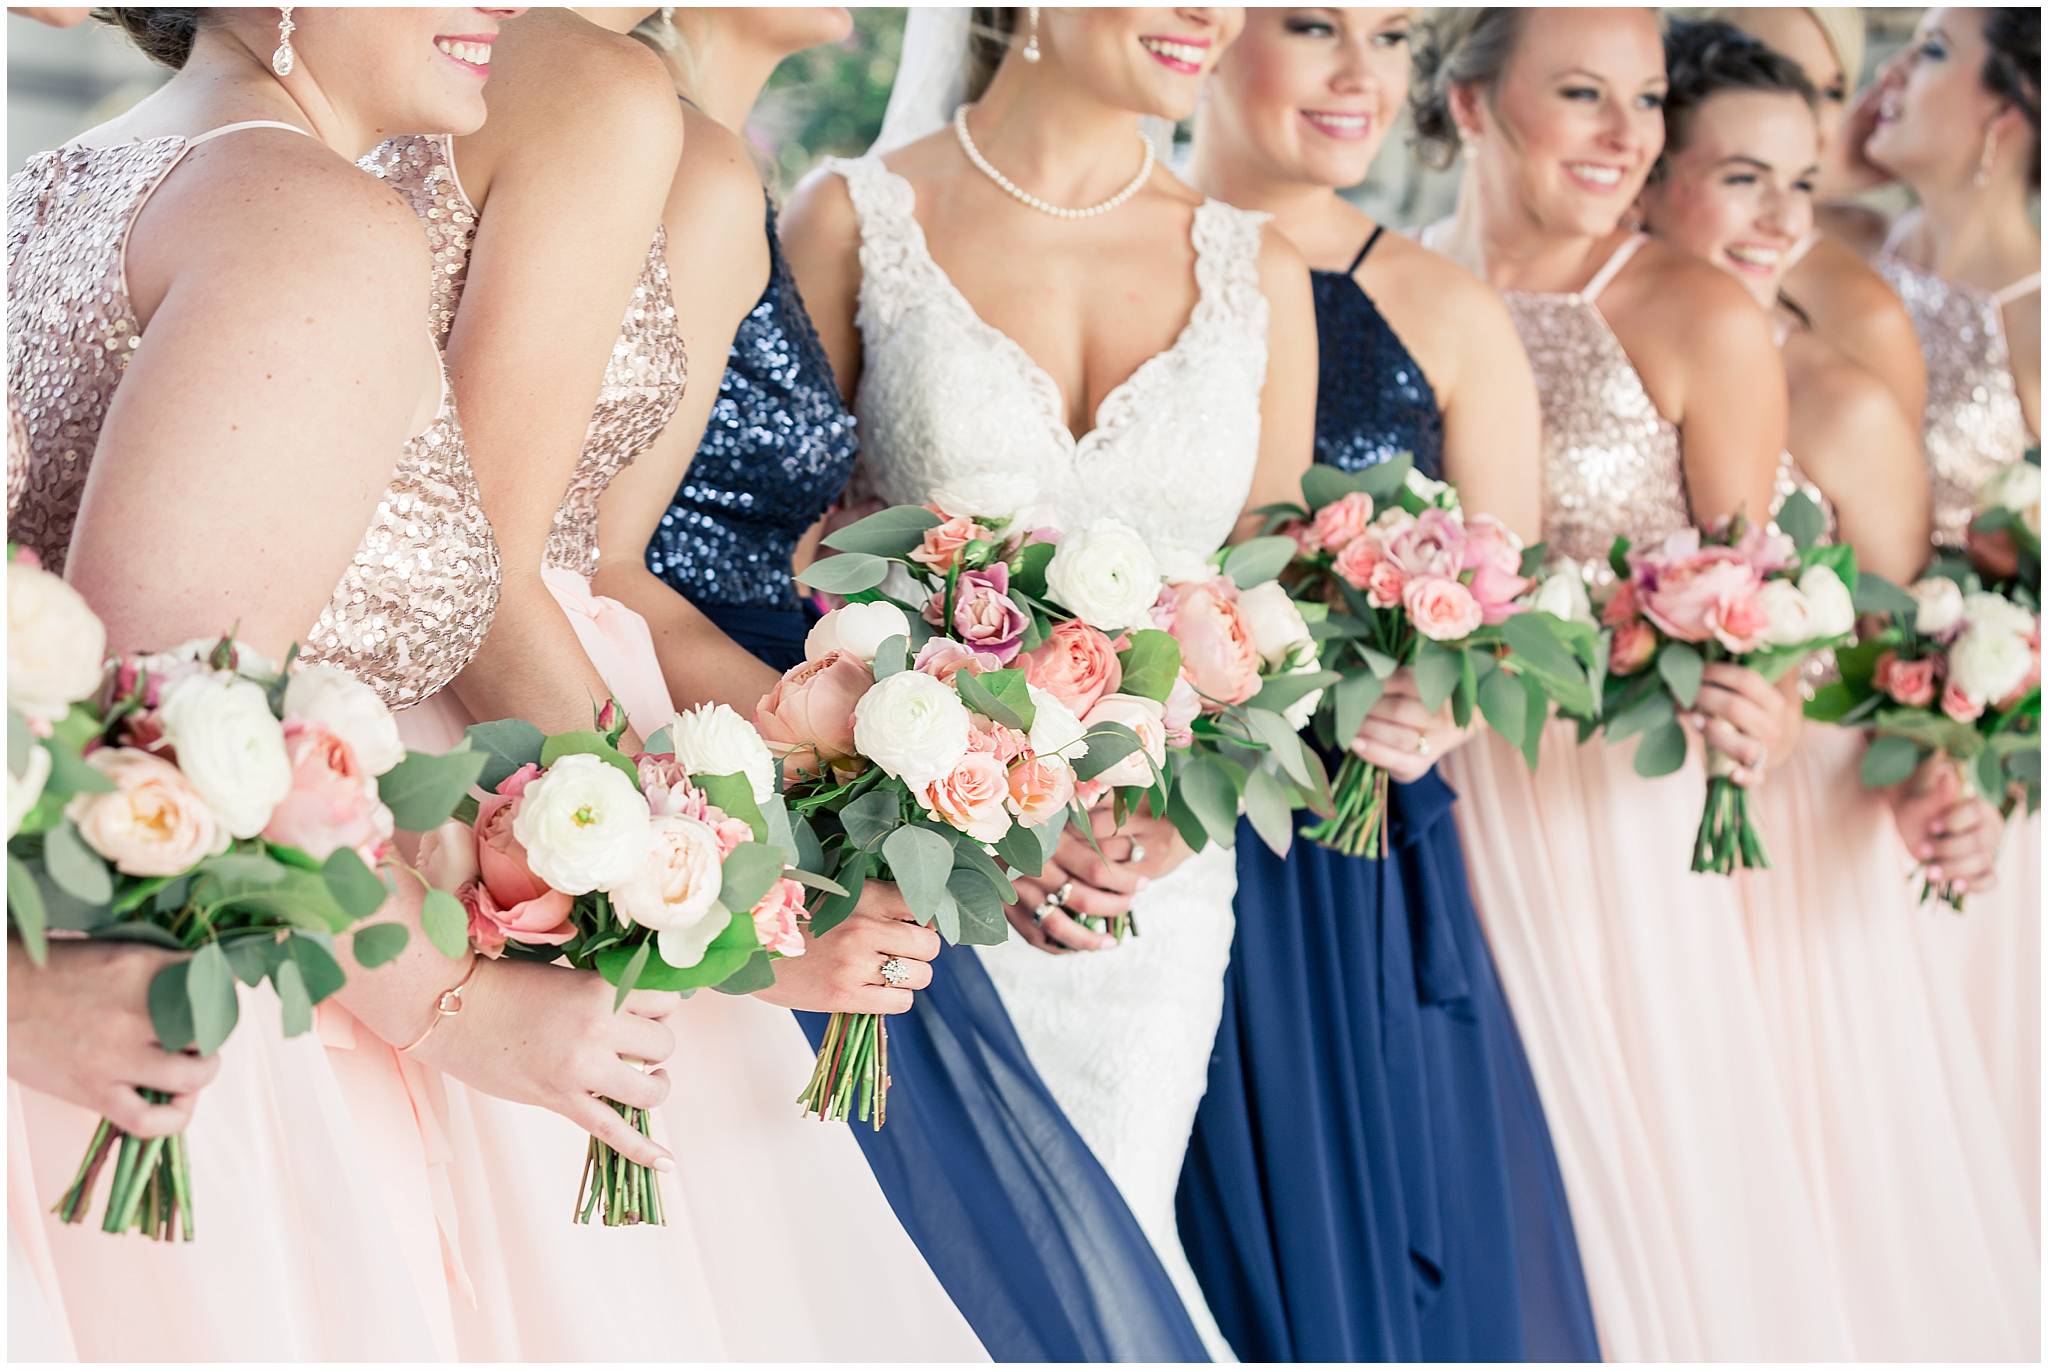 pink and navy wedding colors theme bridesmaids dresses